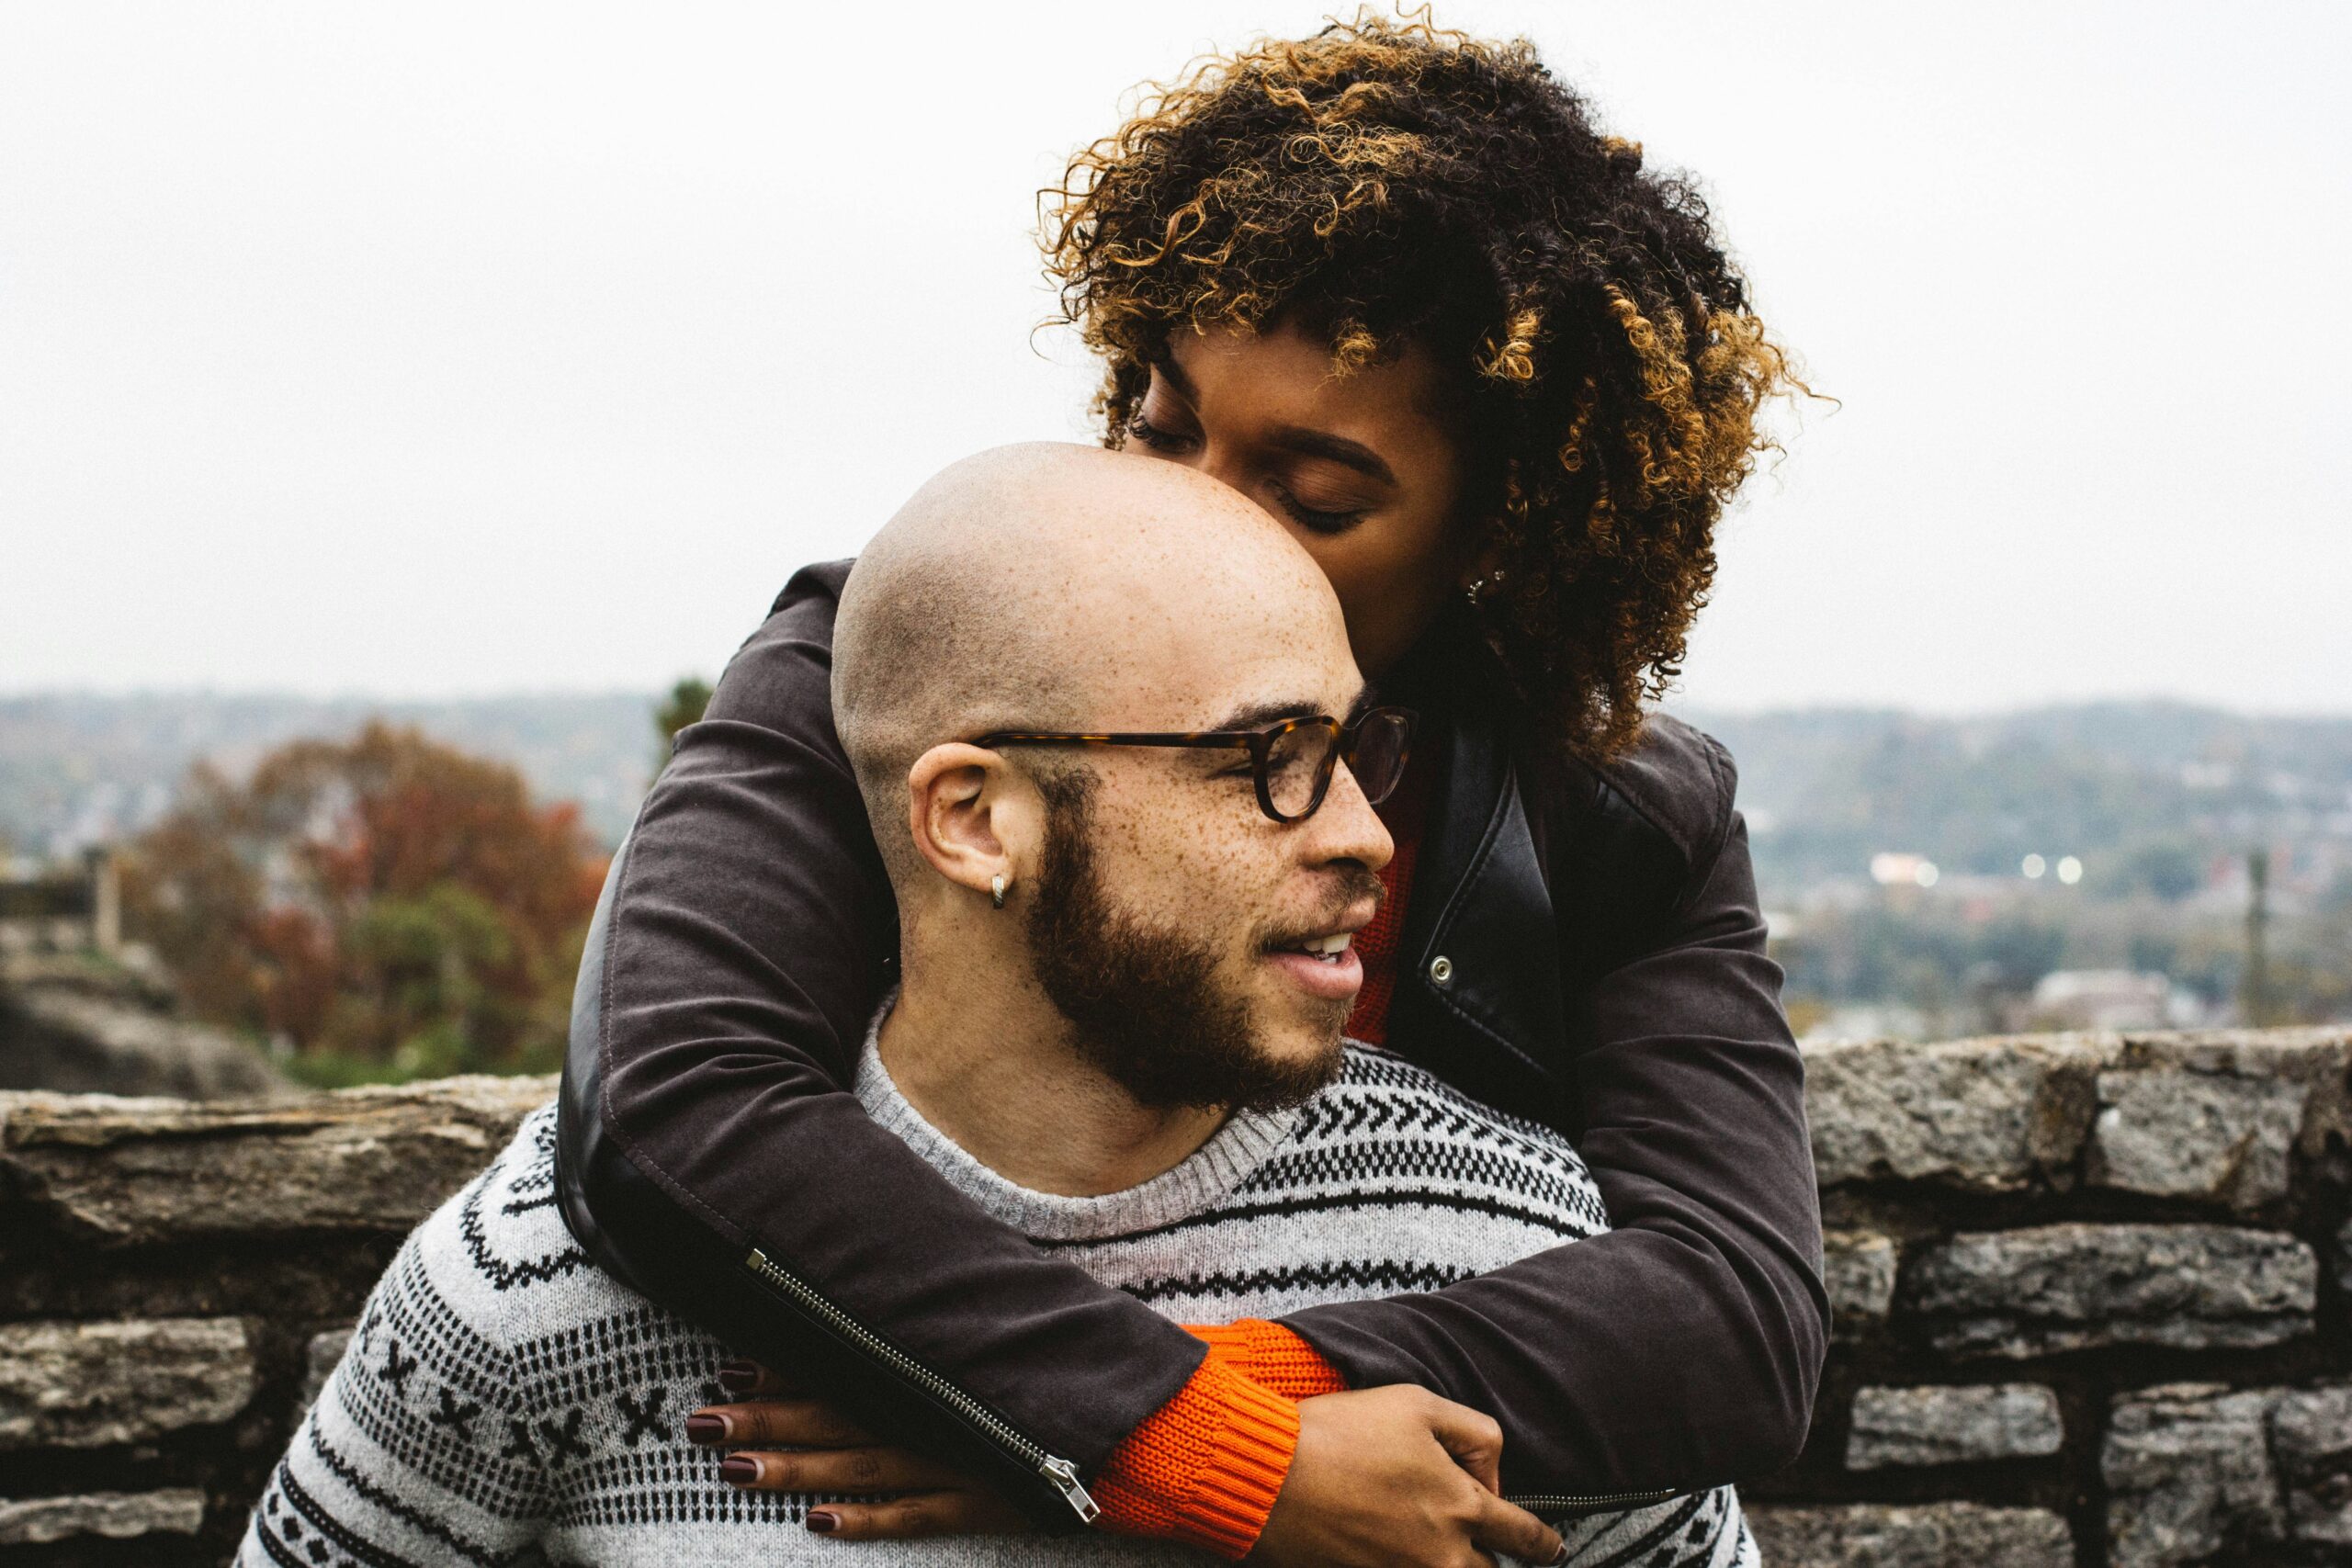 Older Women Dating Younger Men: What You Need to Know